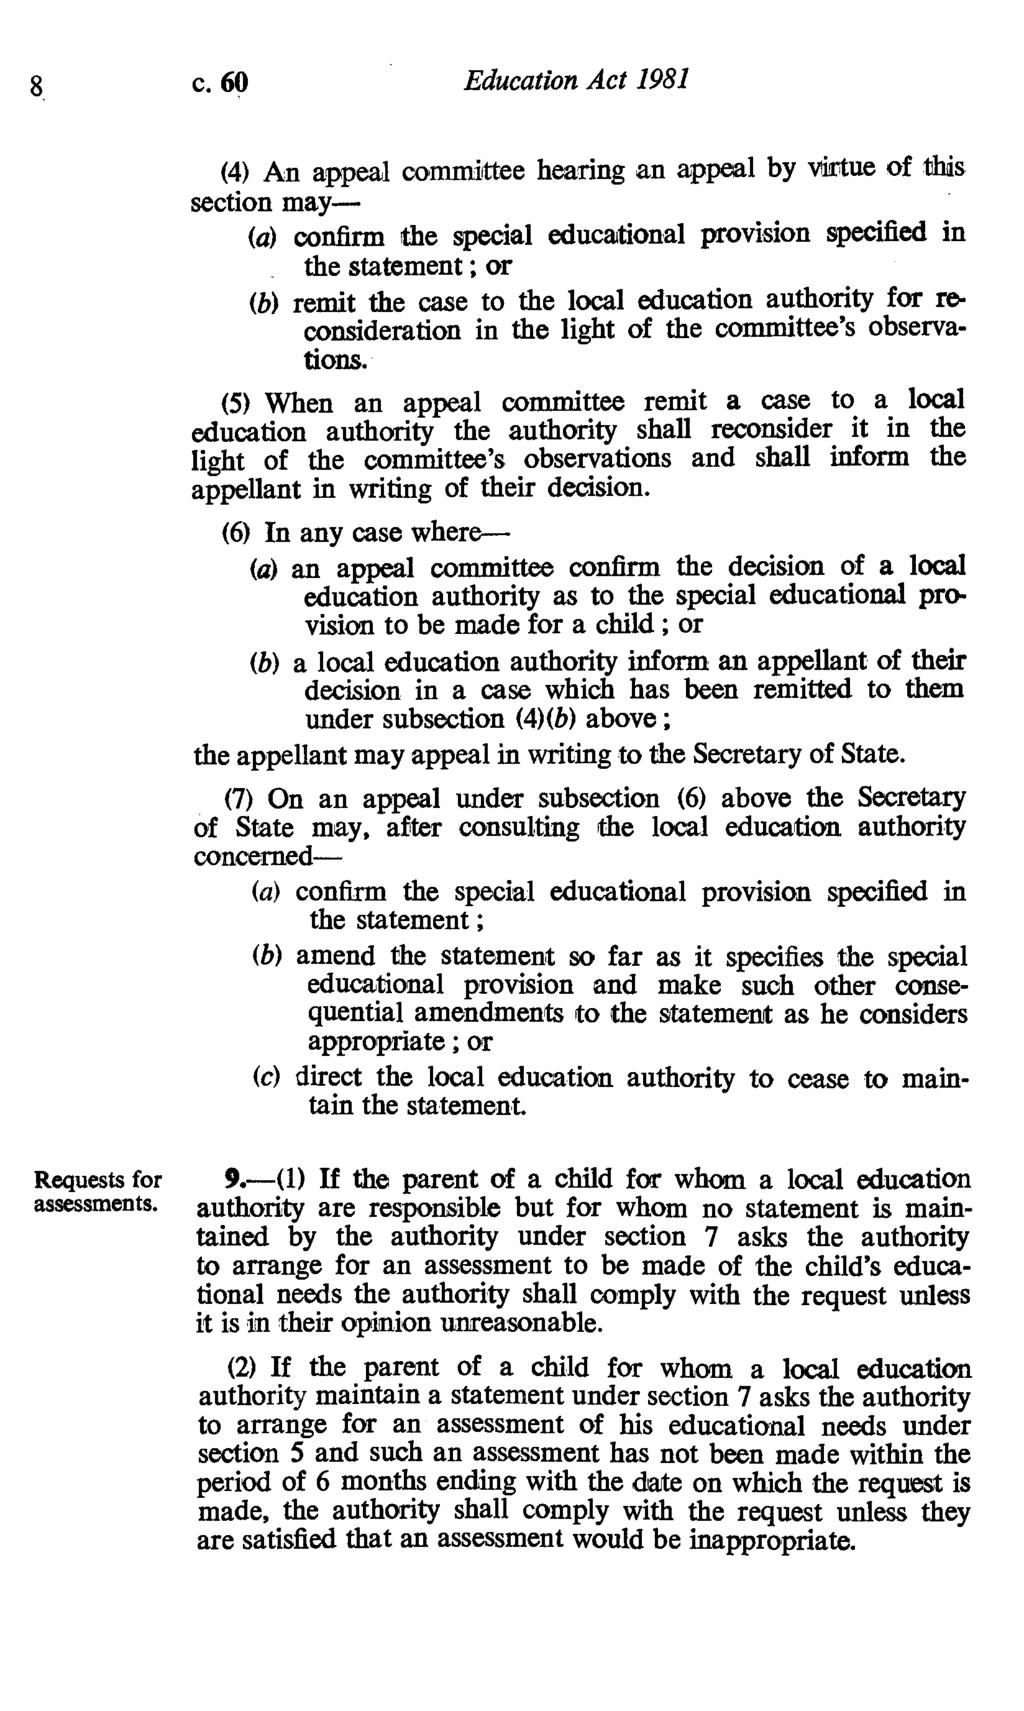 c. 60 Education Act 1981 (4) An appeal committee hearing an appeal by virtue of this section may- (a) confirm the special educational provision specified in the statement ; or (b) remit the case to